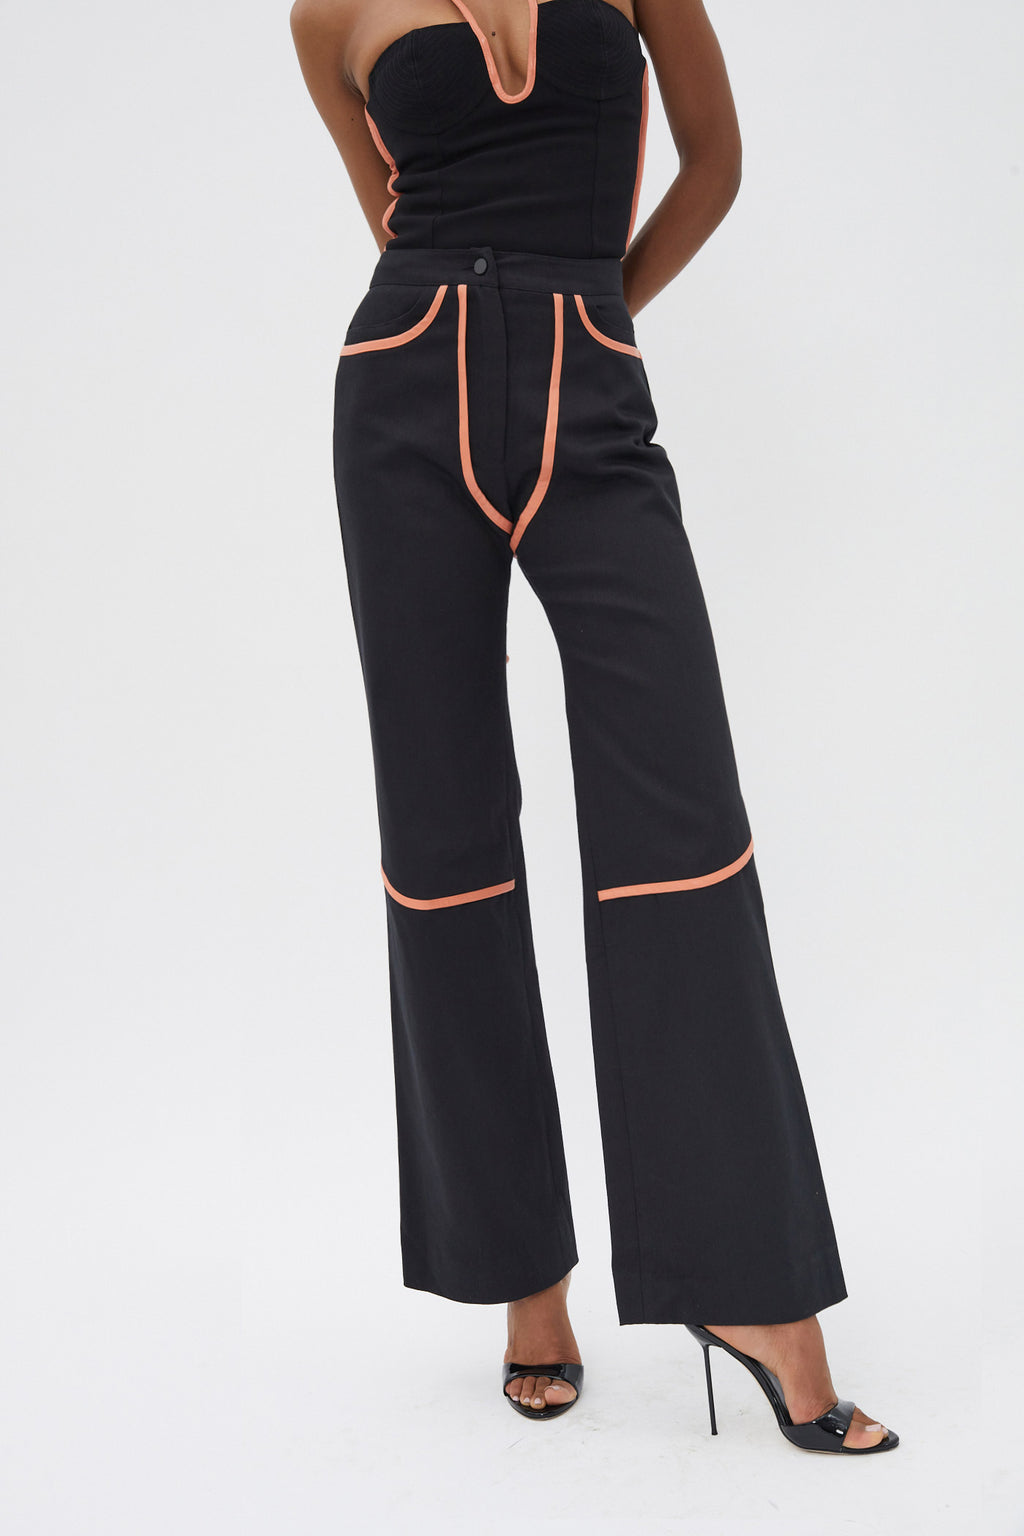 Rodeo Black Coral Jeans